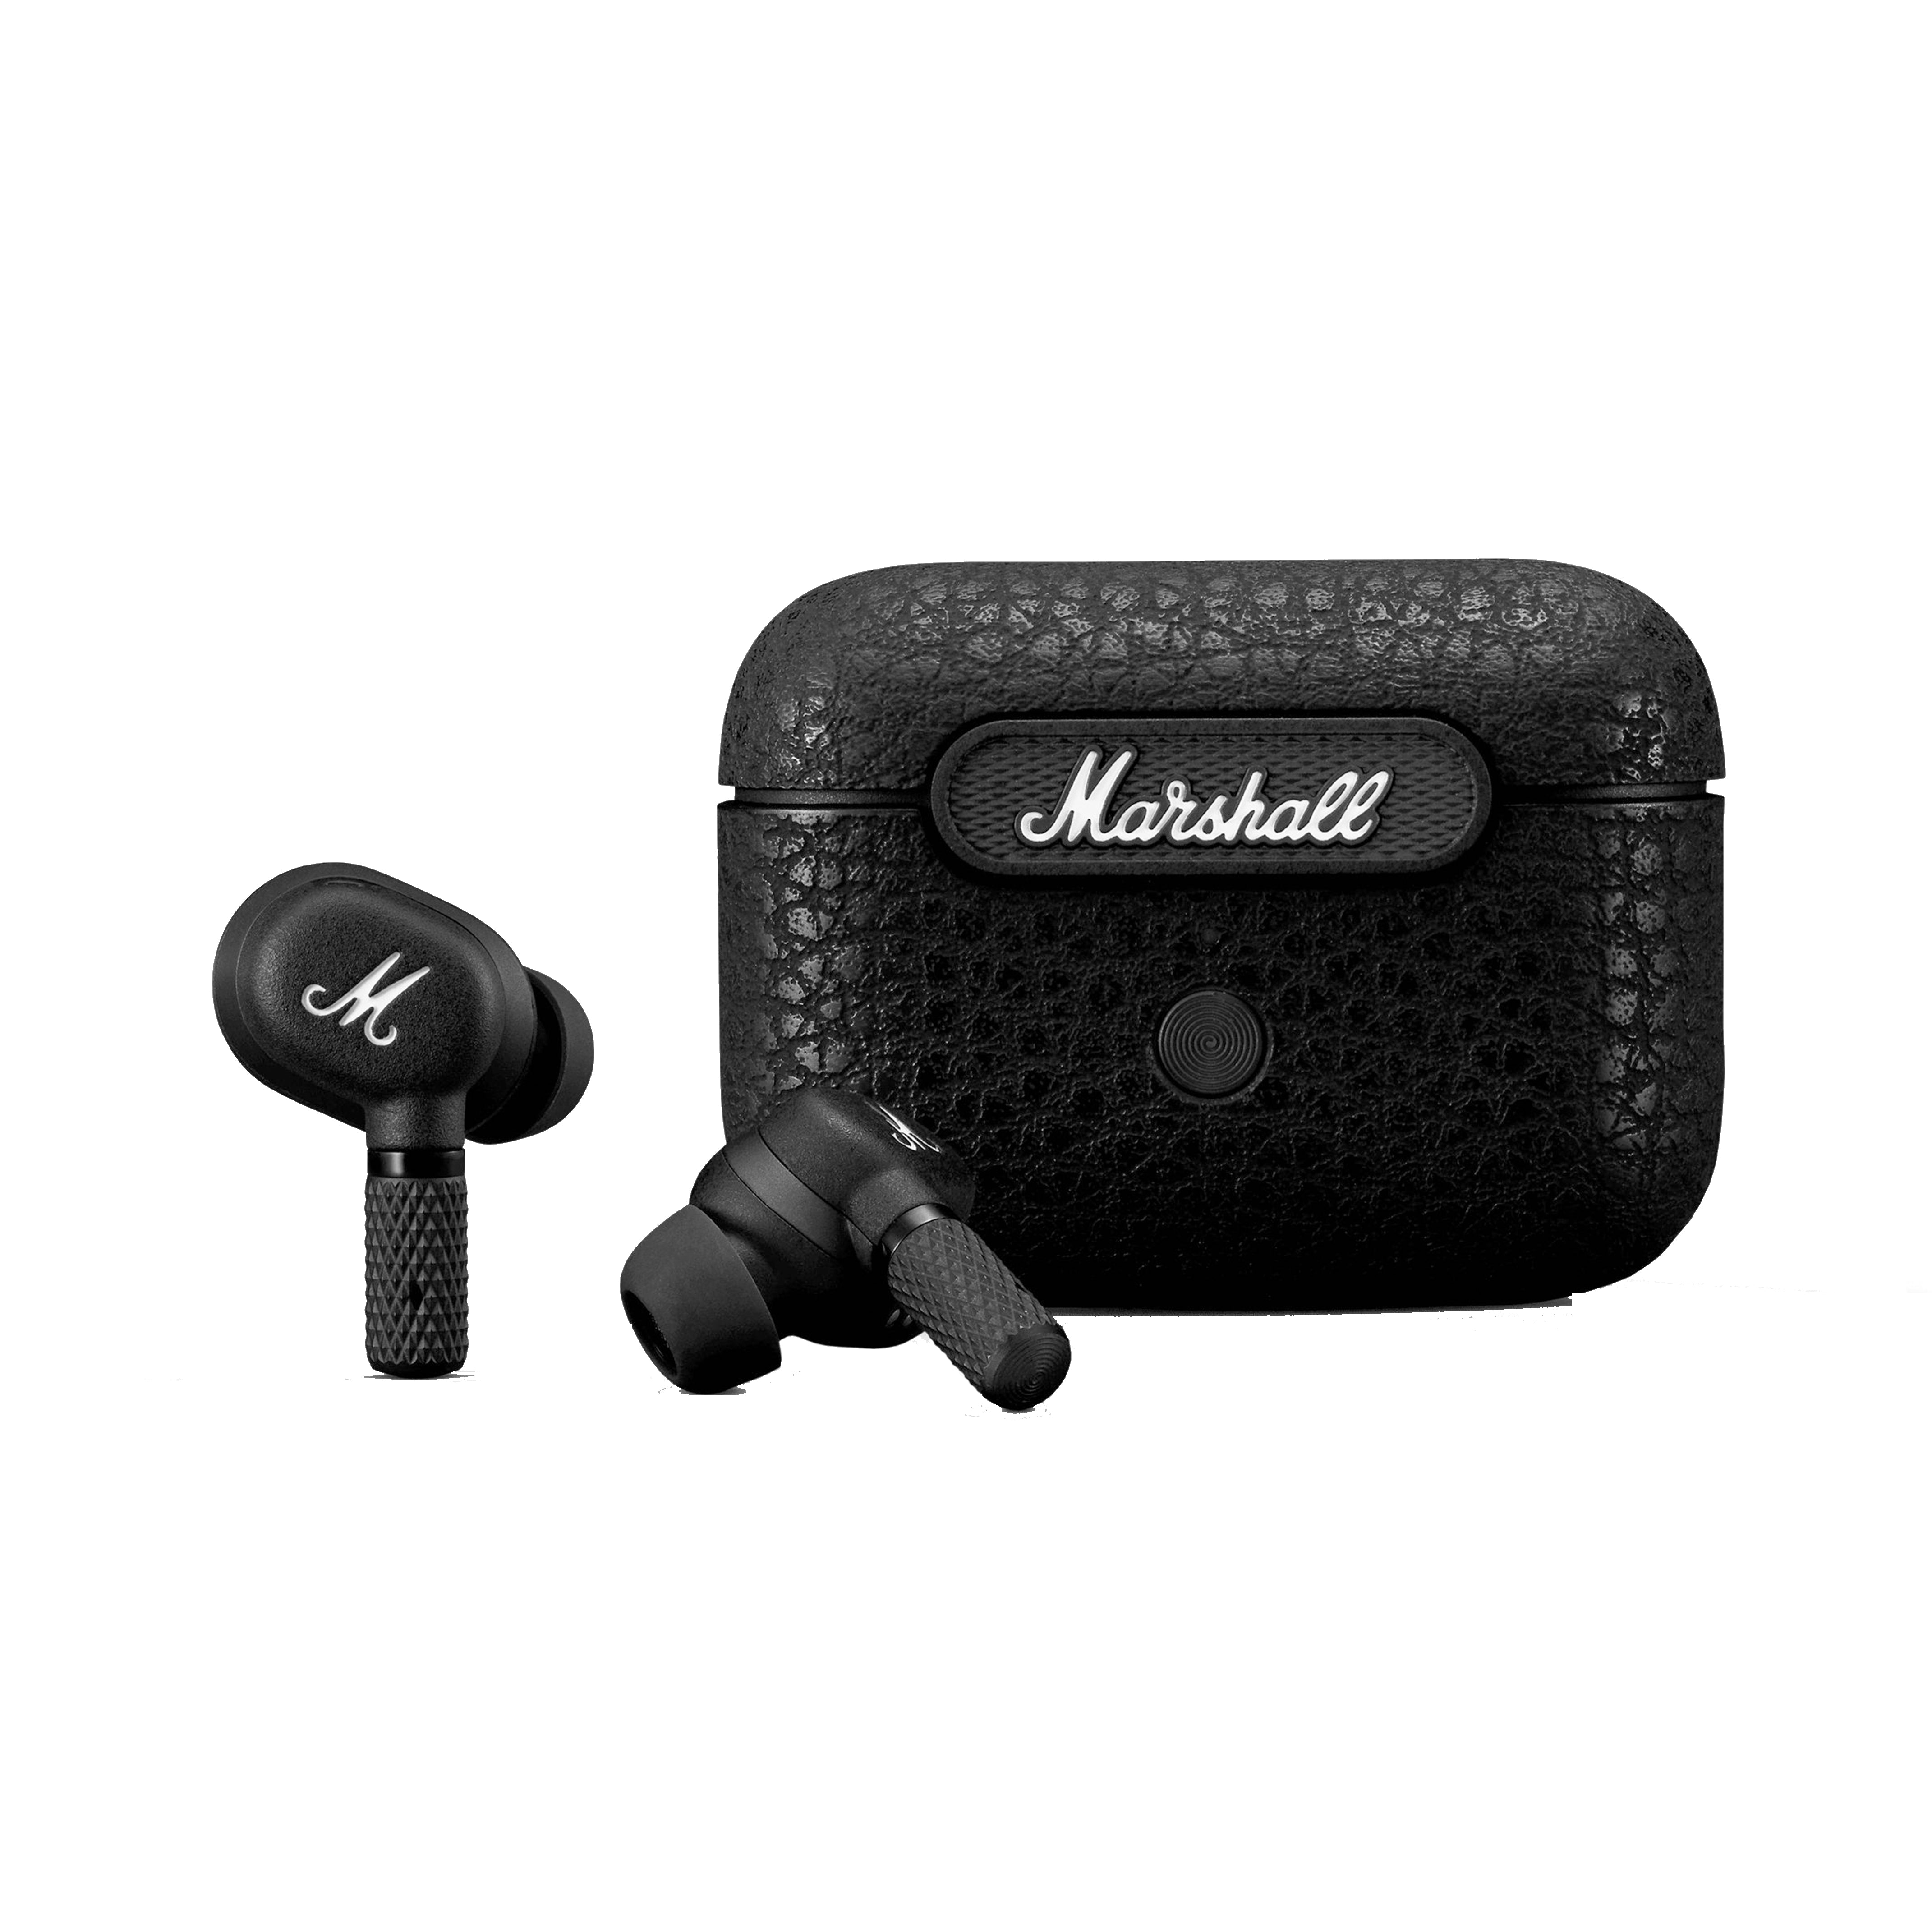 Marshall Motif ANC True Wireless Active Noise Cancelling Bluetooth Headphones Earbuds - Black from Marshall sold by 961Souq-Zalka